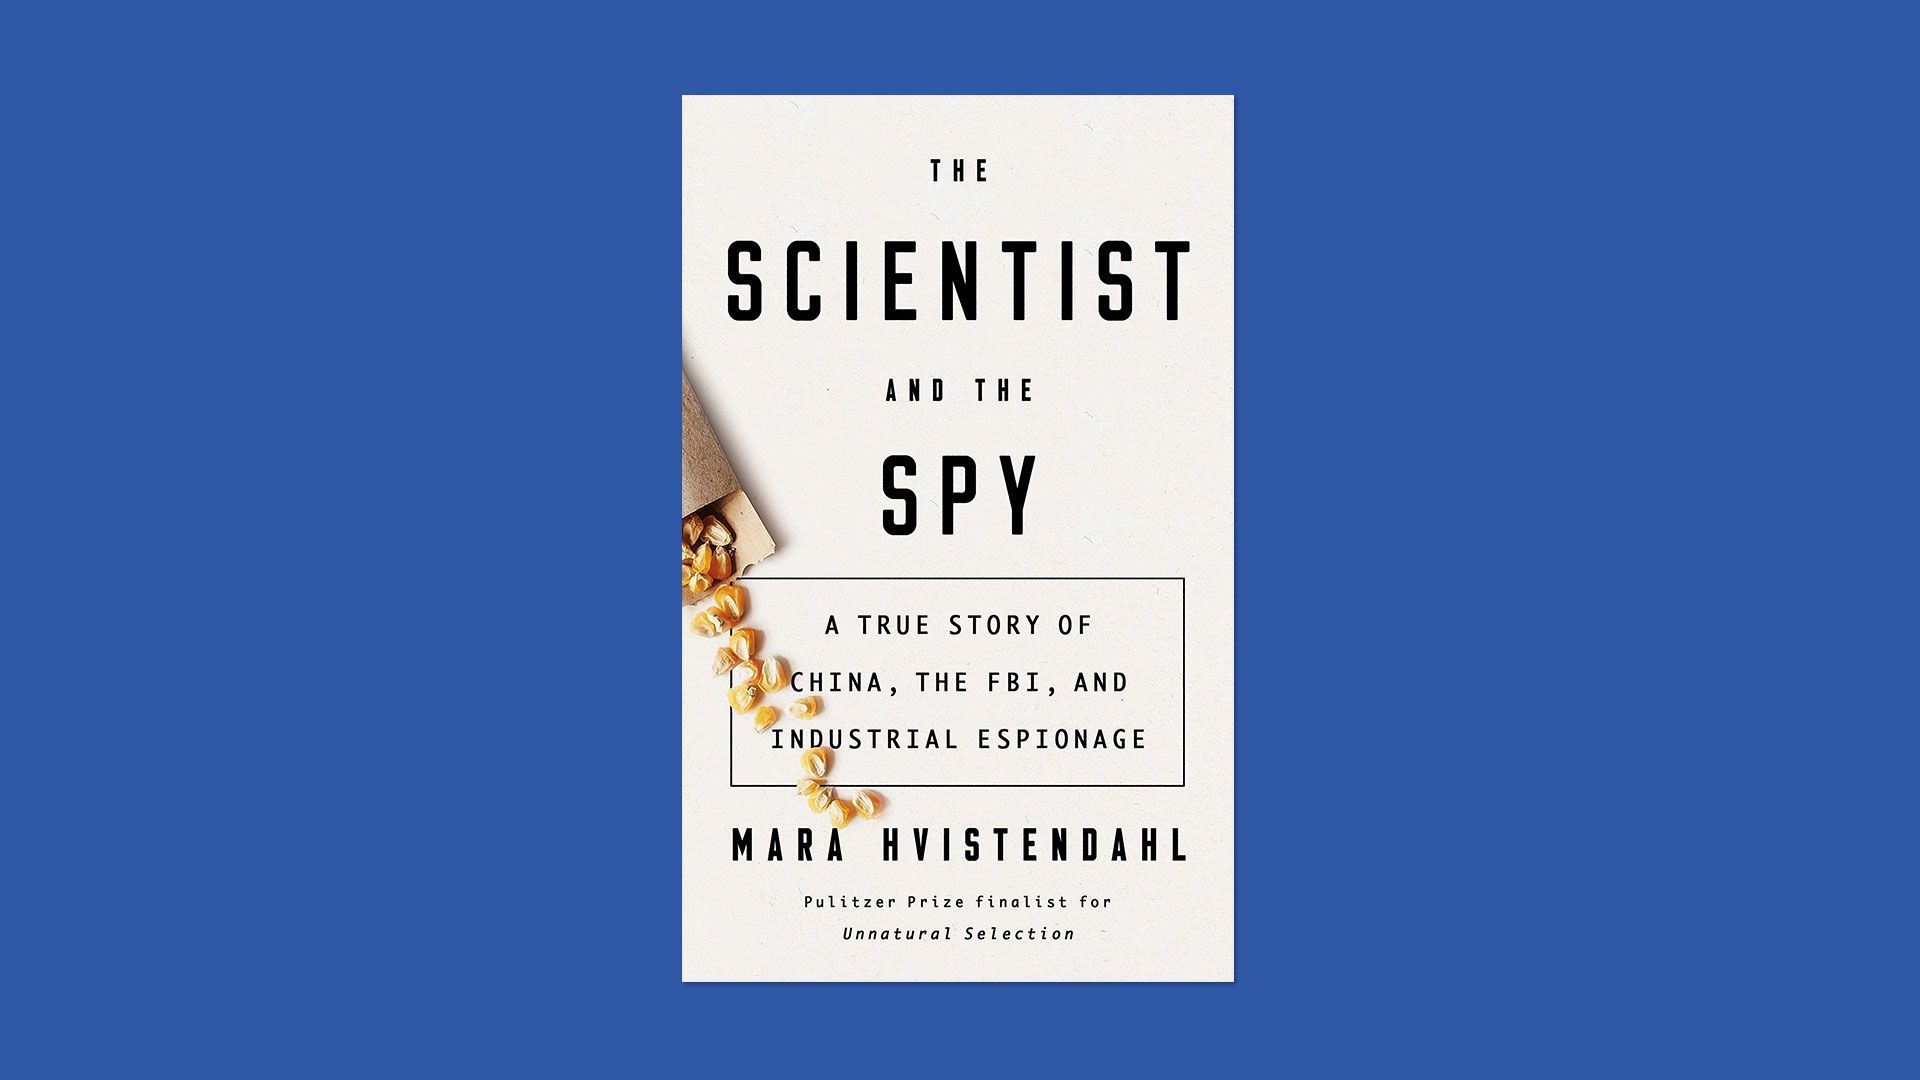 Book jacket for The Scientist and The Spy